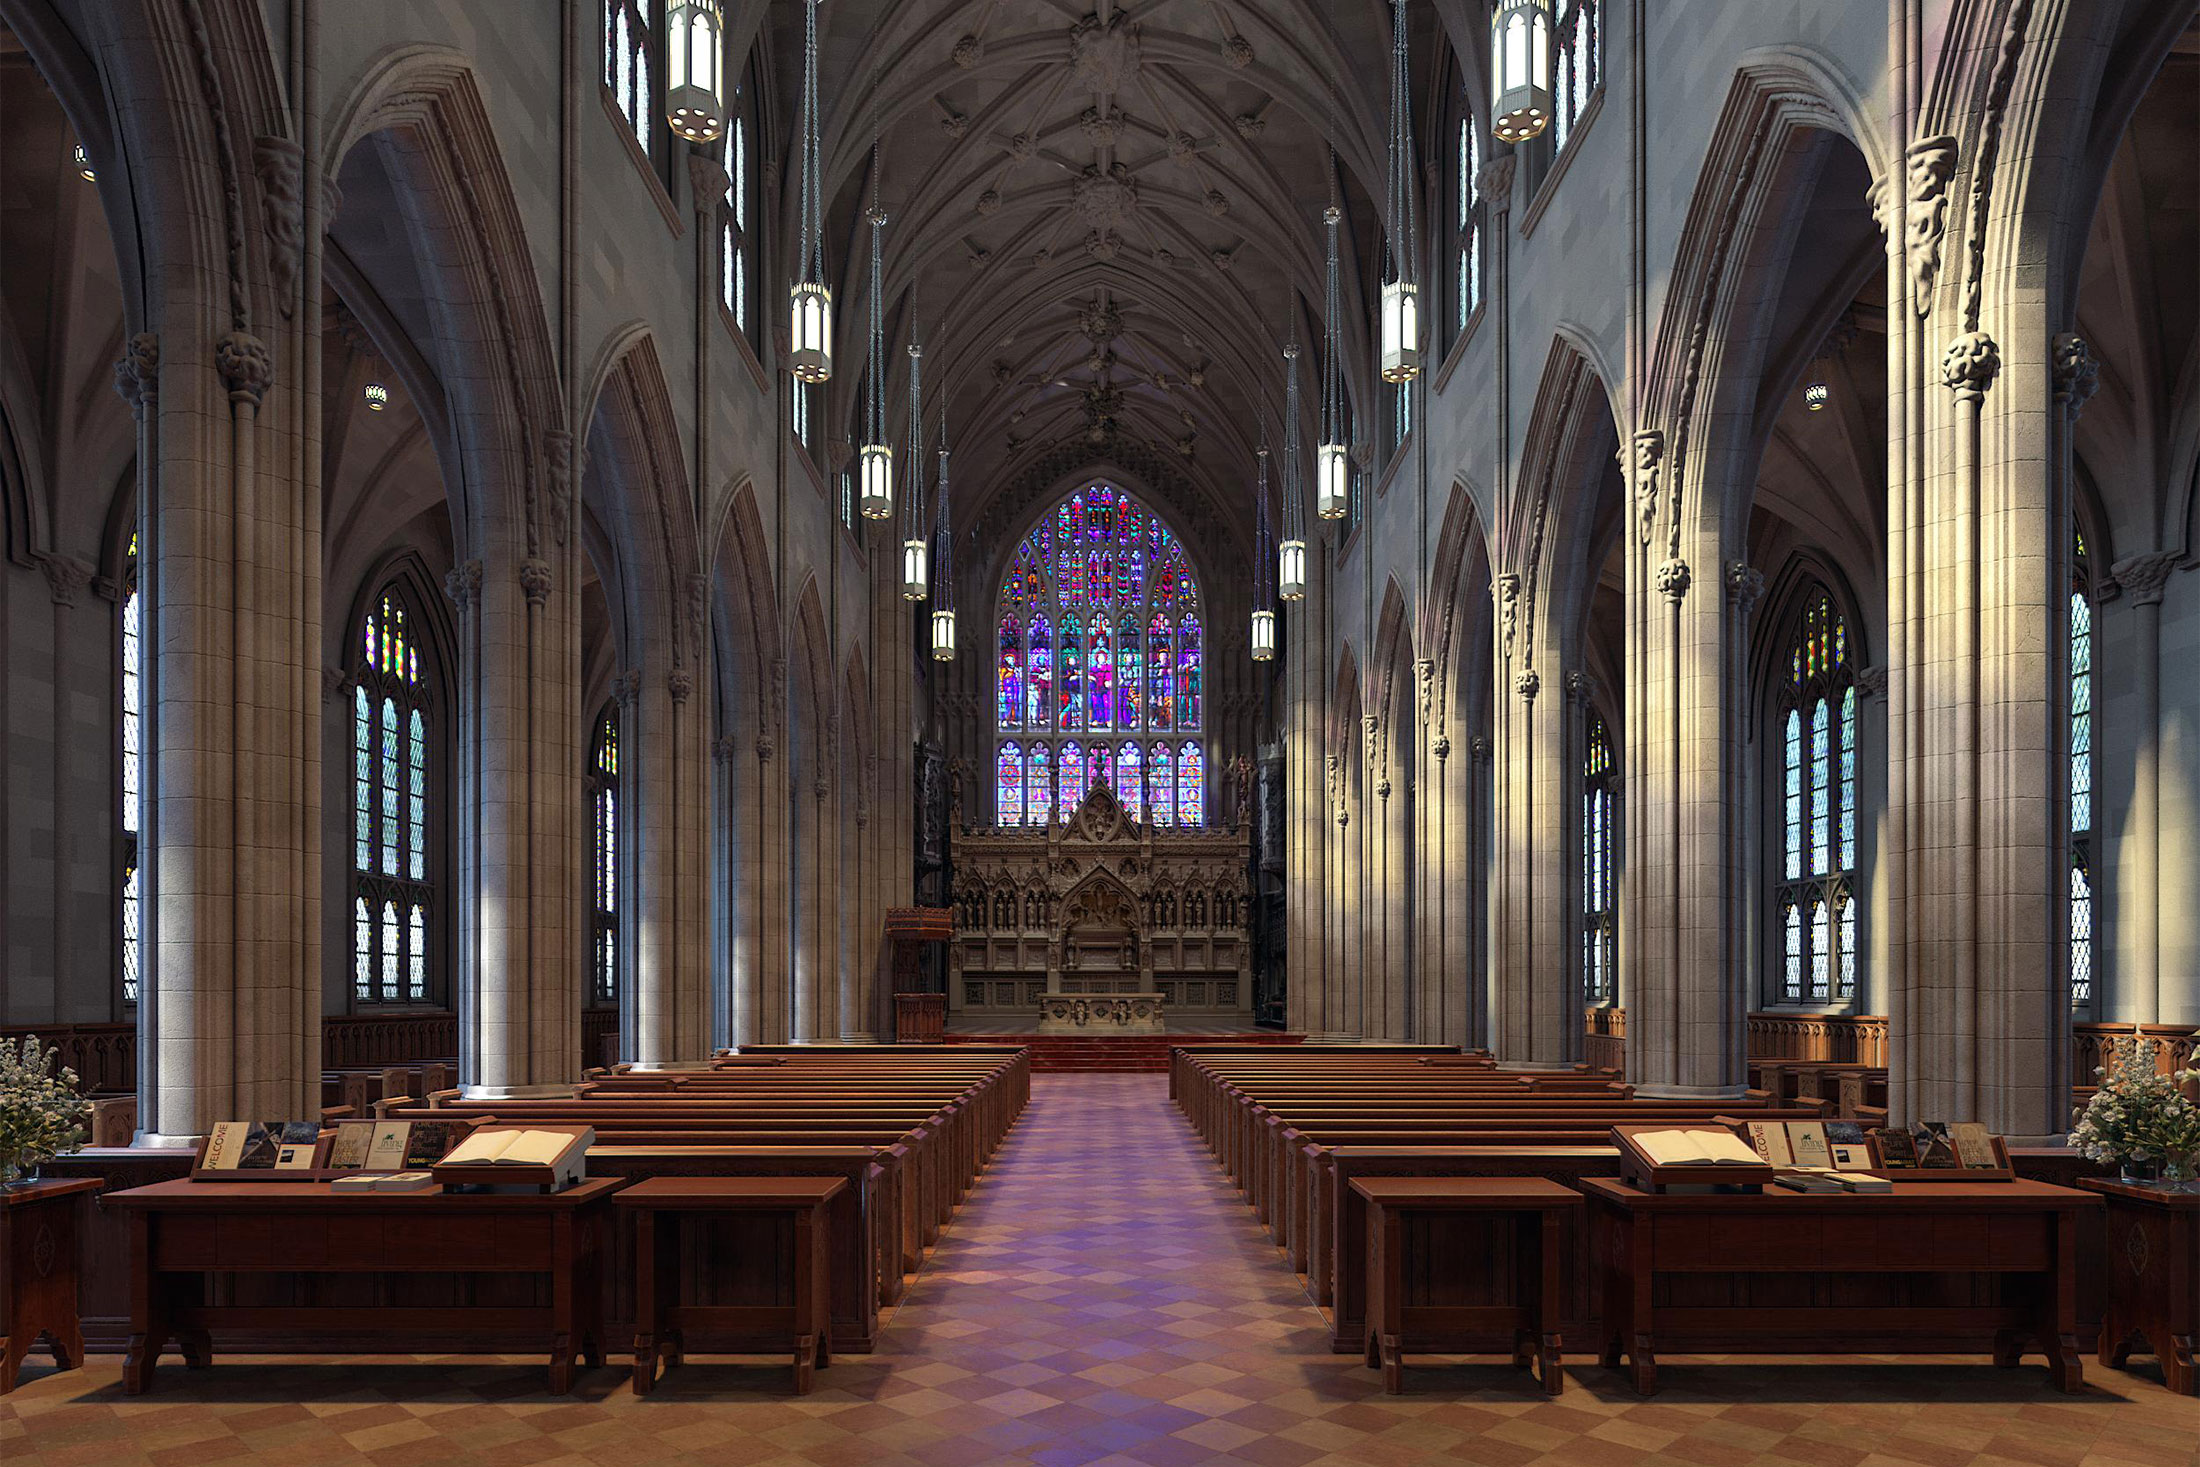 CGI Architectural Animation of the exterior of the The Trinity Church project located in Wall Street, New York City